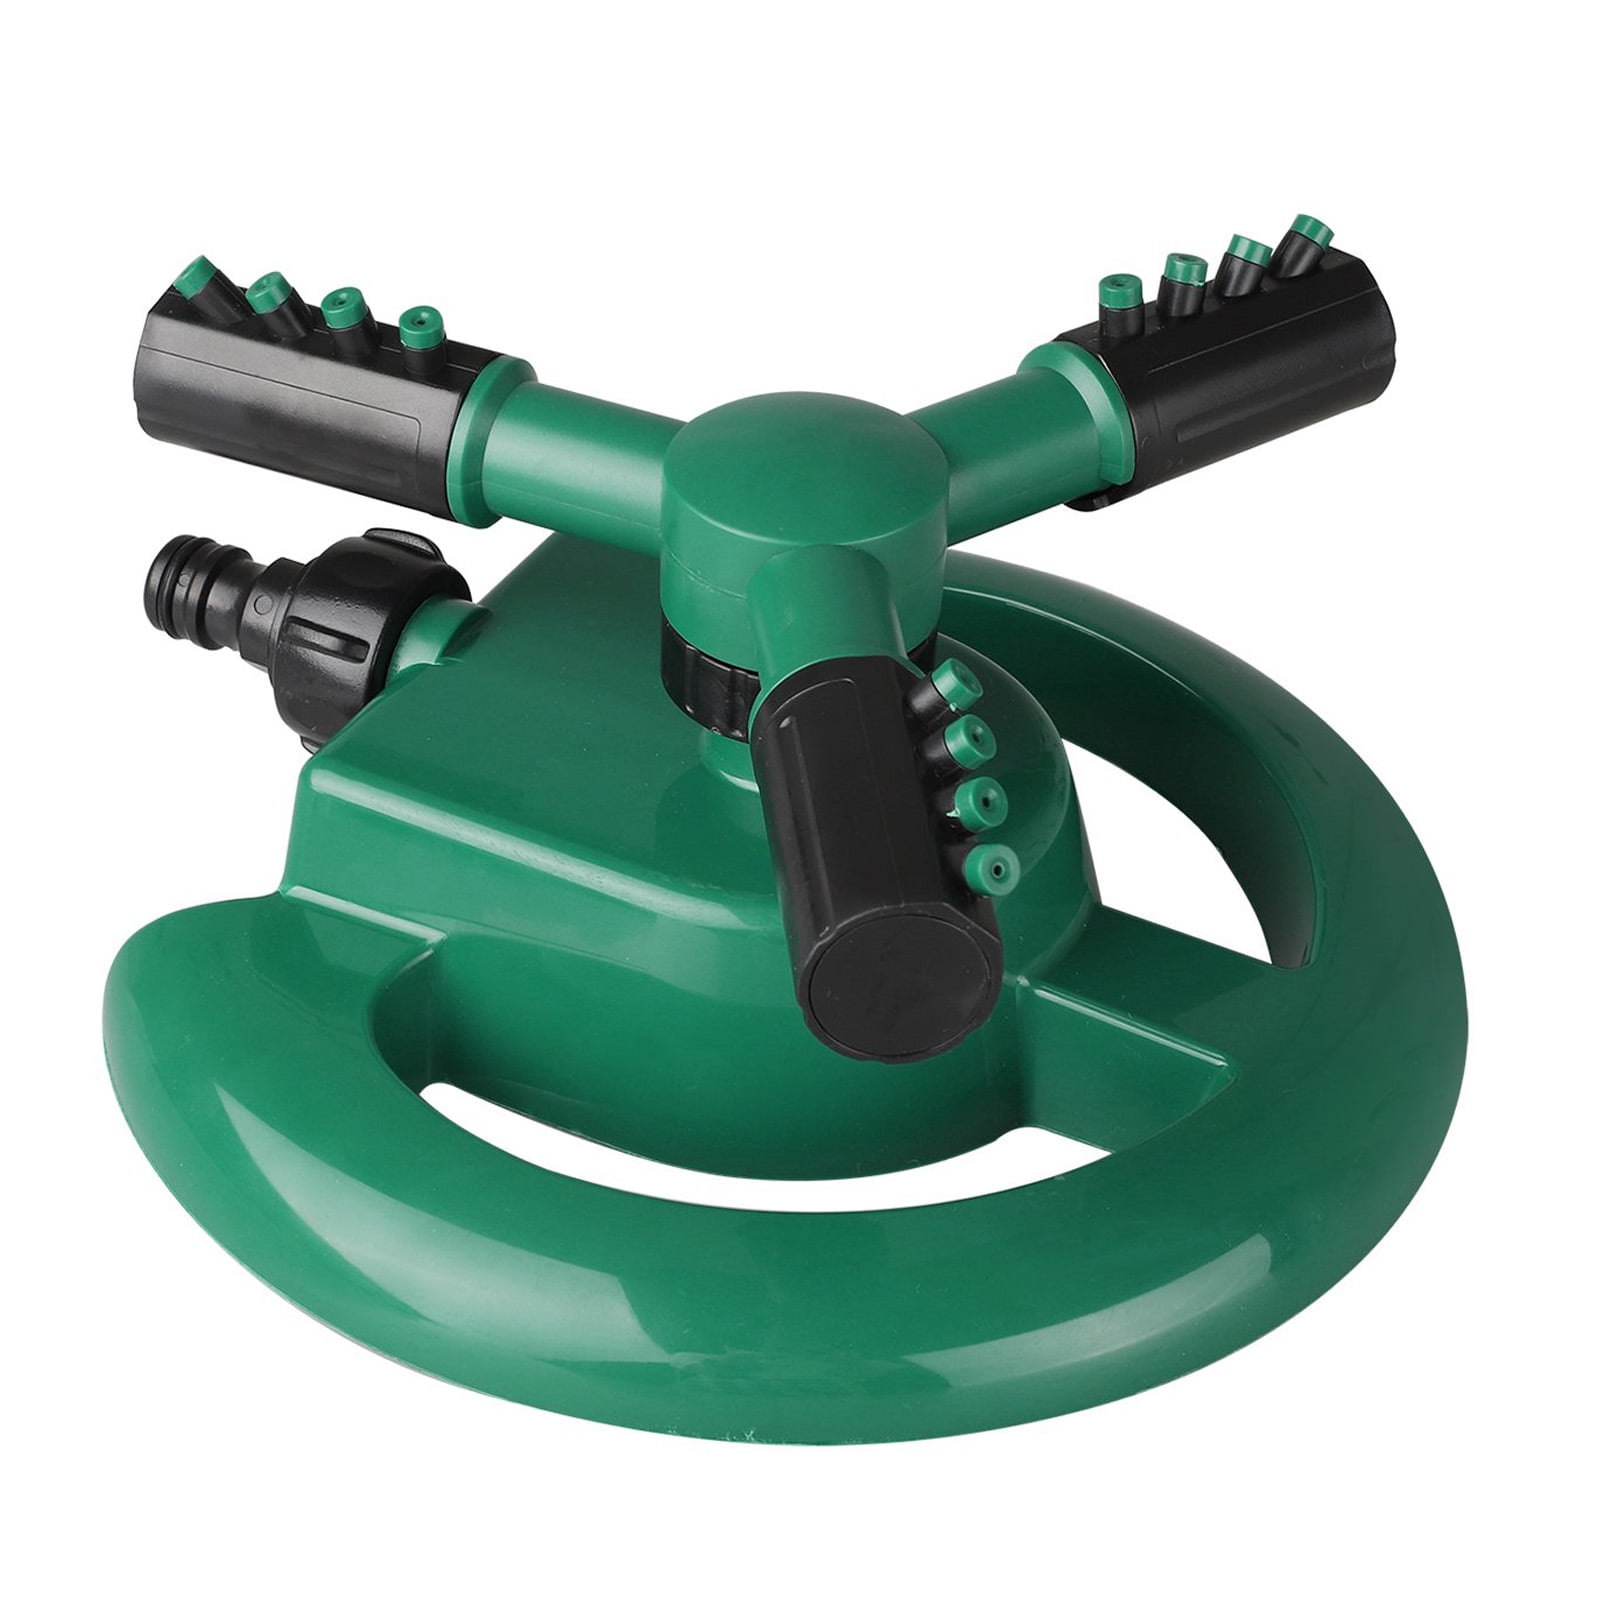 GH TRADE Swinging sprinkler for lawns and gardens Cleaning needle included Have a beautiful garden / lawn Easy reach adjustment with sliders Quiet operation and range over 300 m